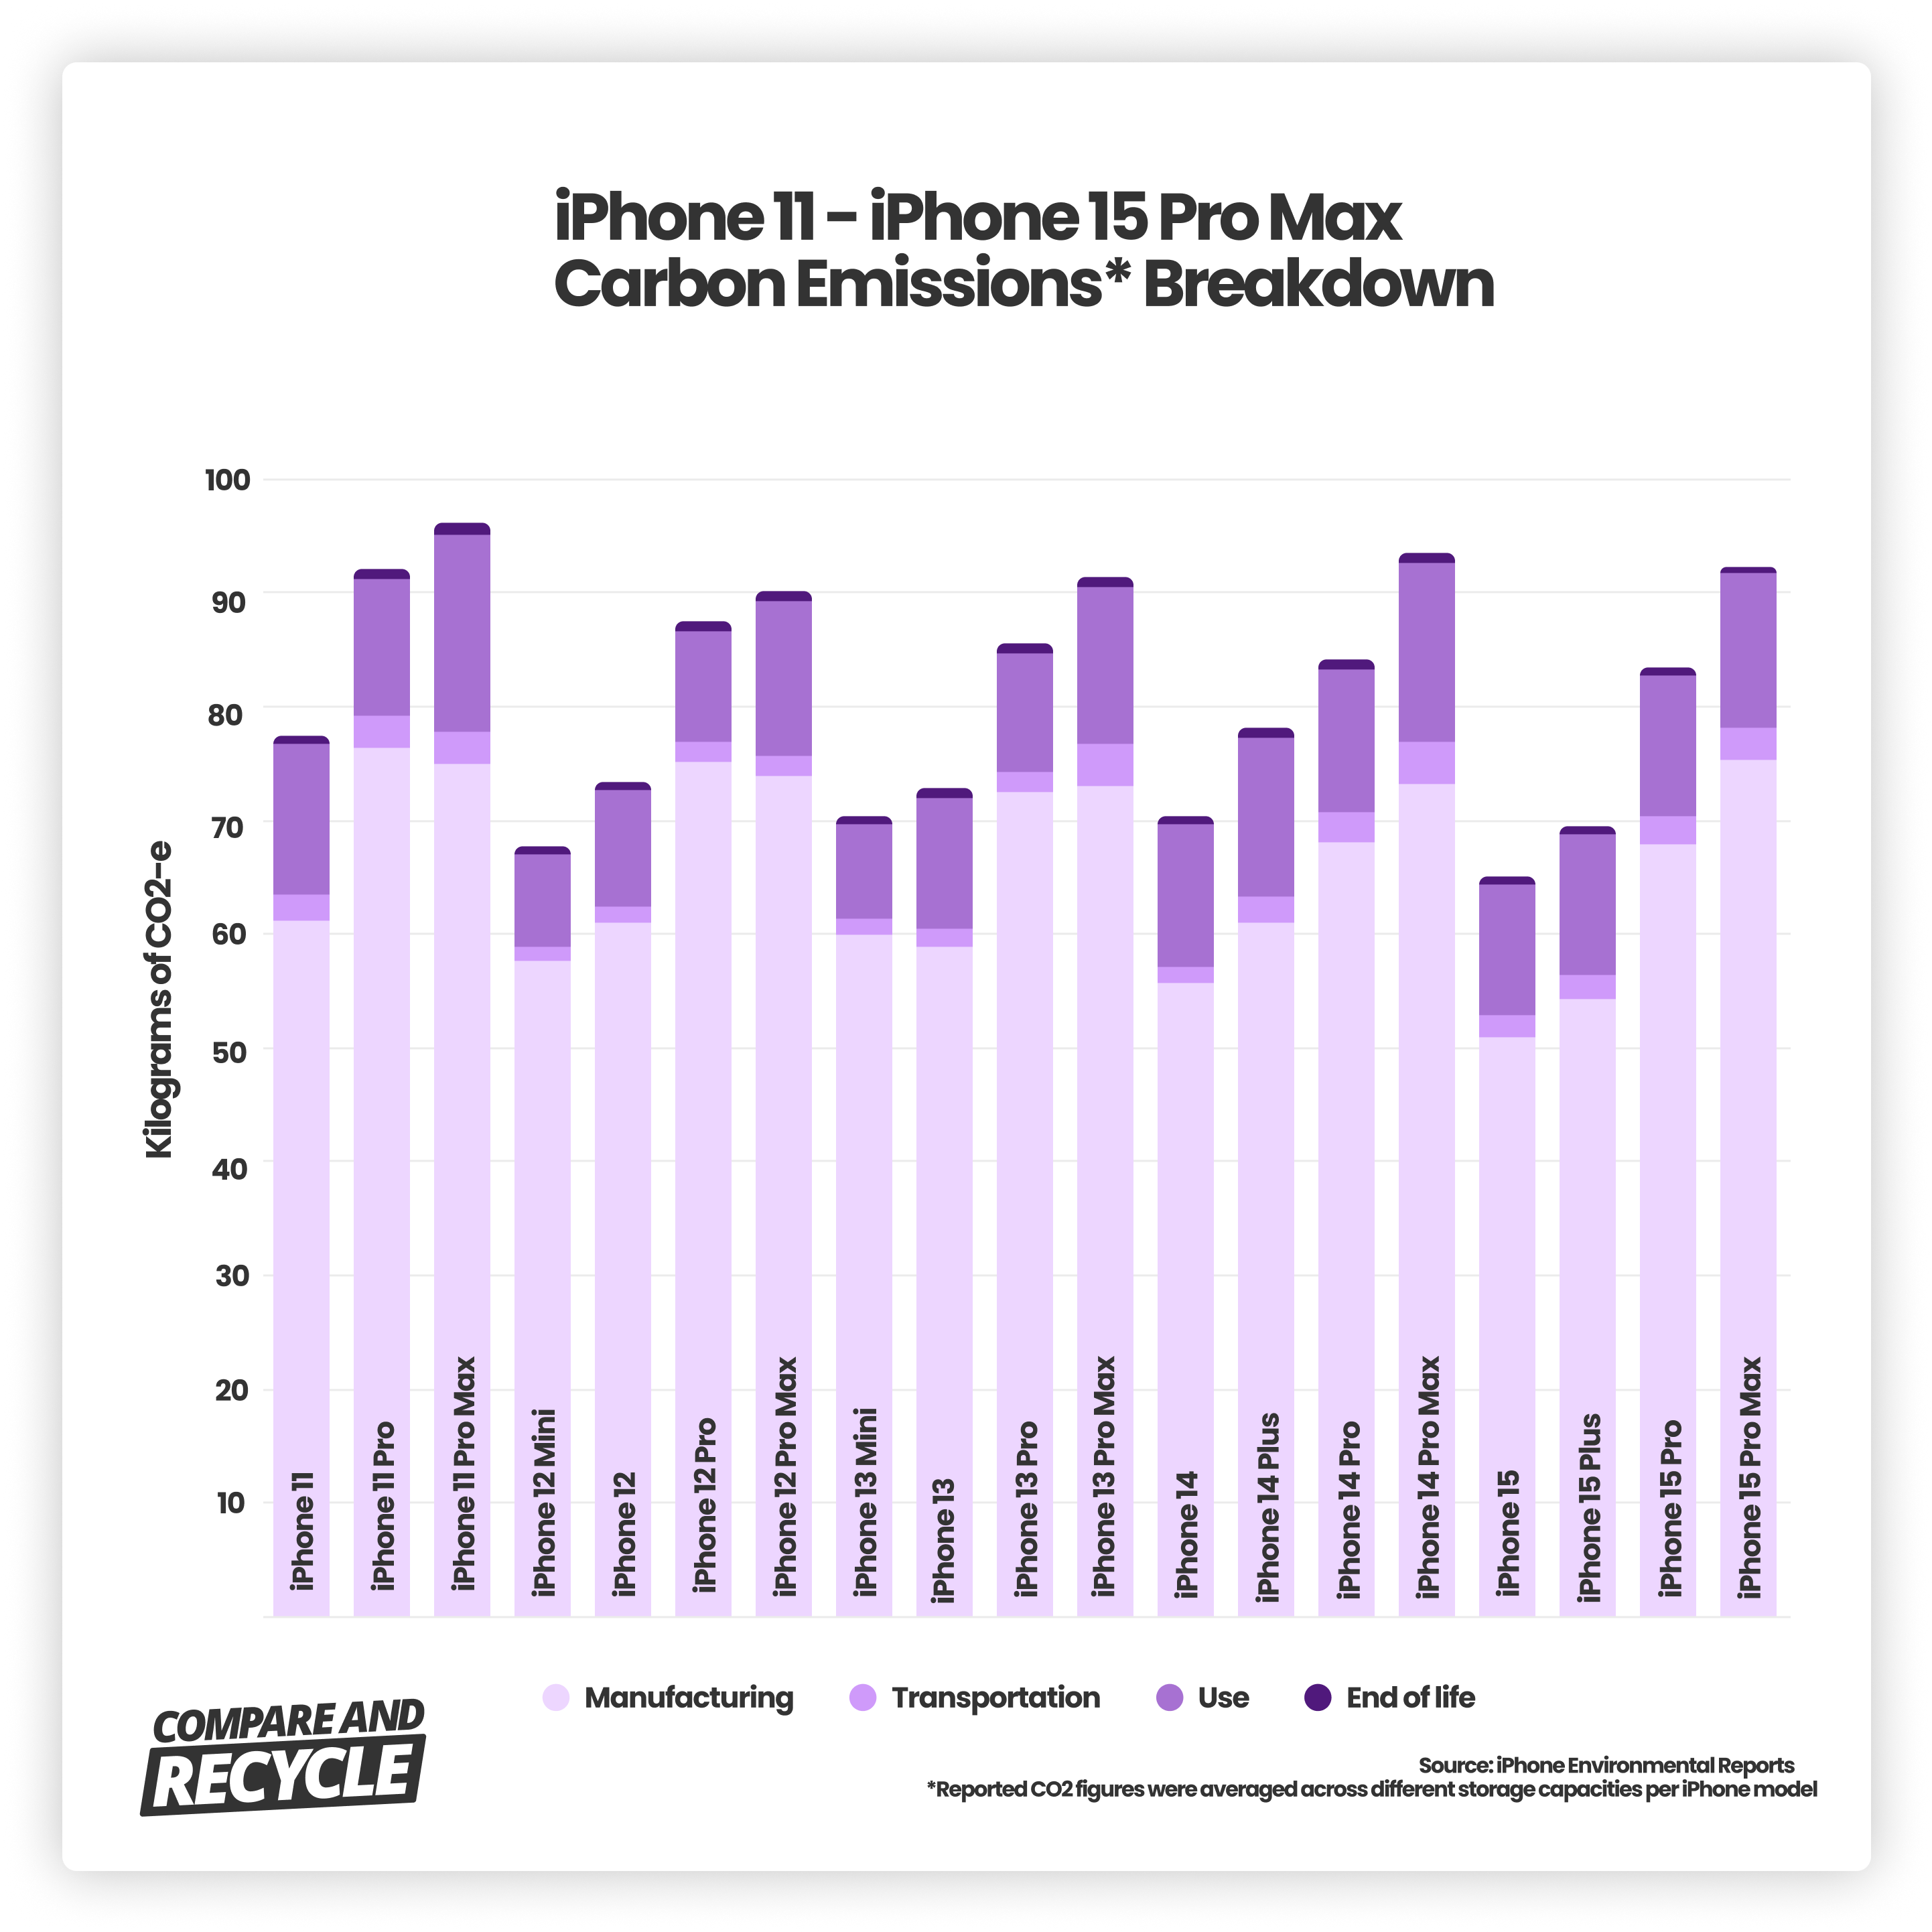 bar chart showing a breakdown of carbon emissions for iPhone 11 - iPhone 15 Pro Max